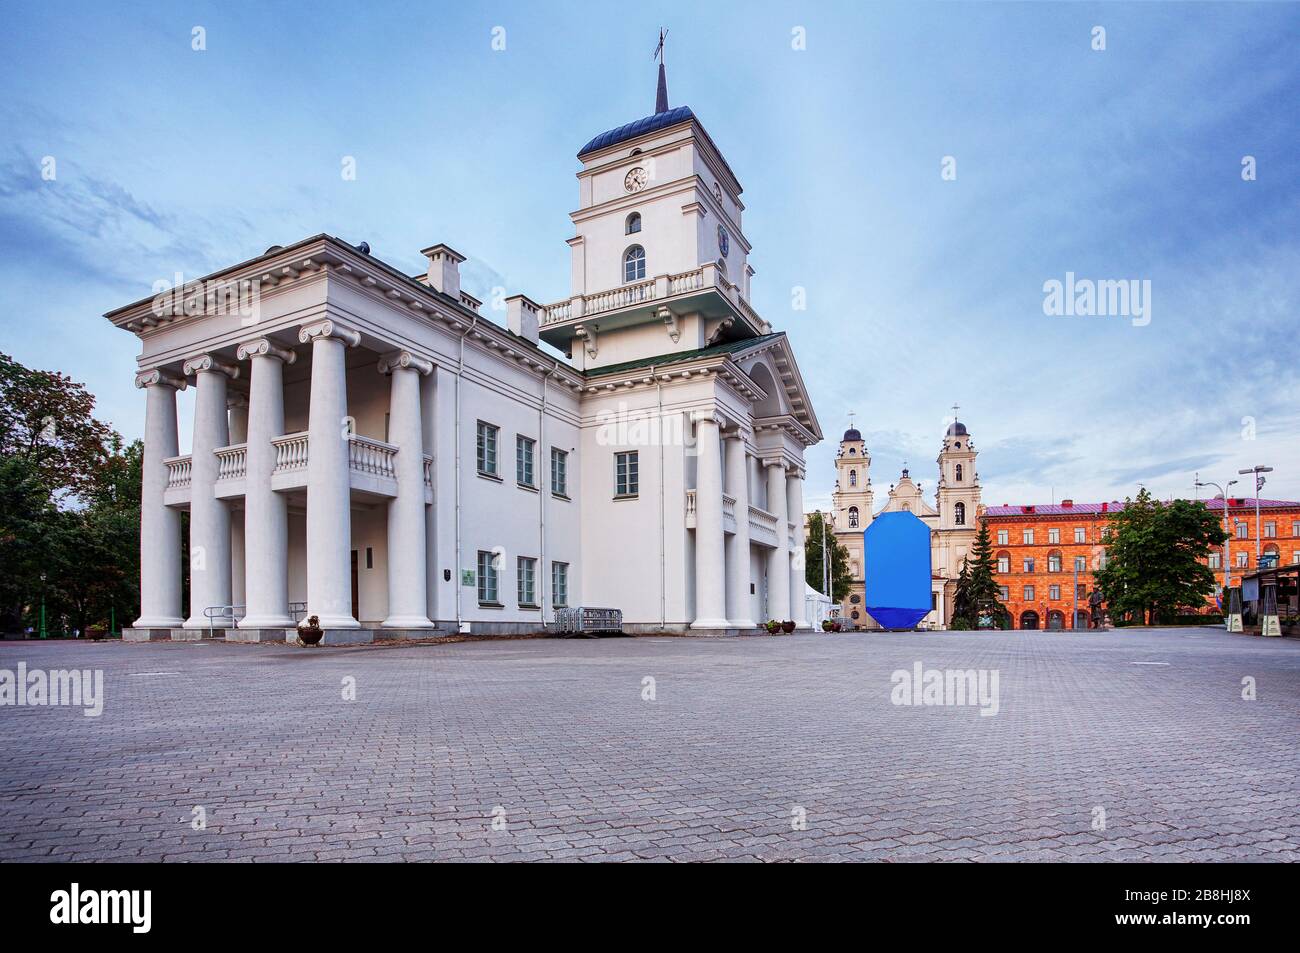 Belarus - Minsk with City hall at night Stock Photo